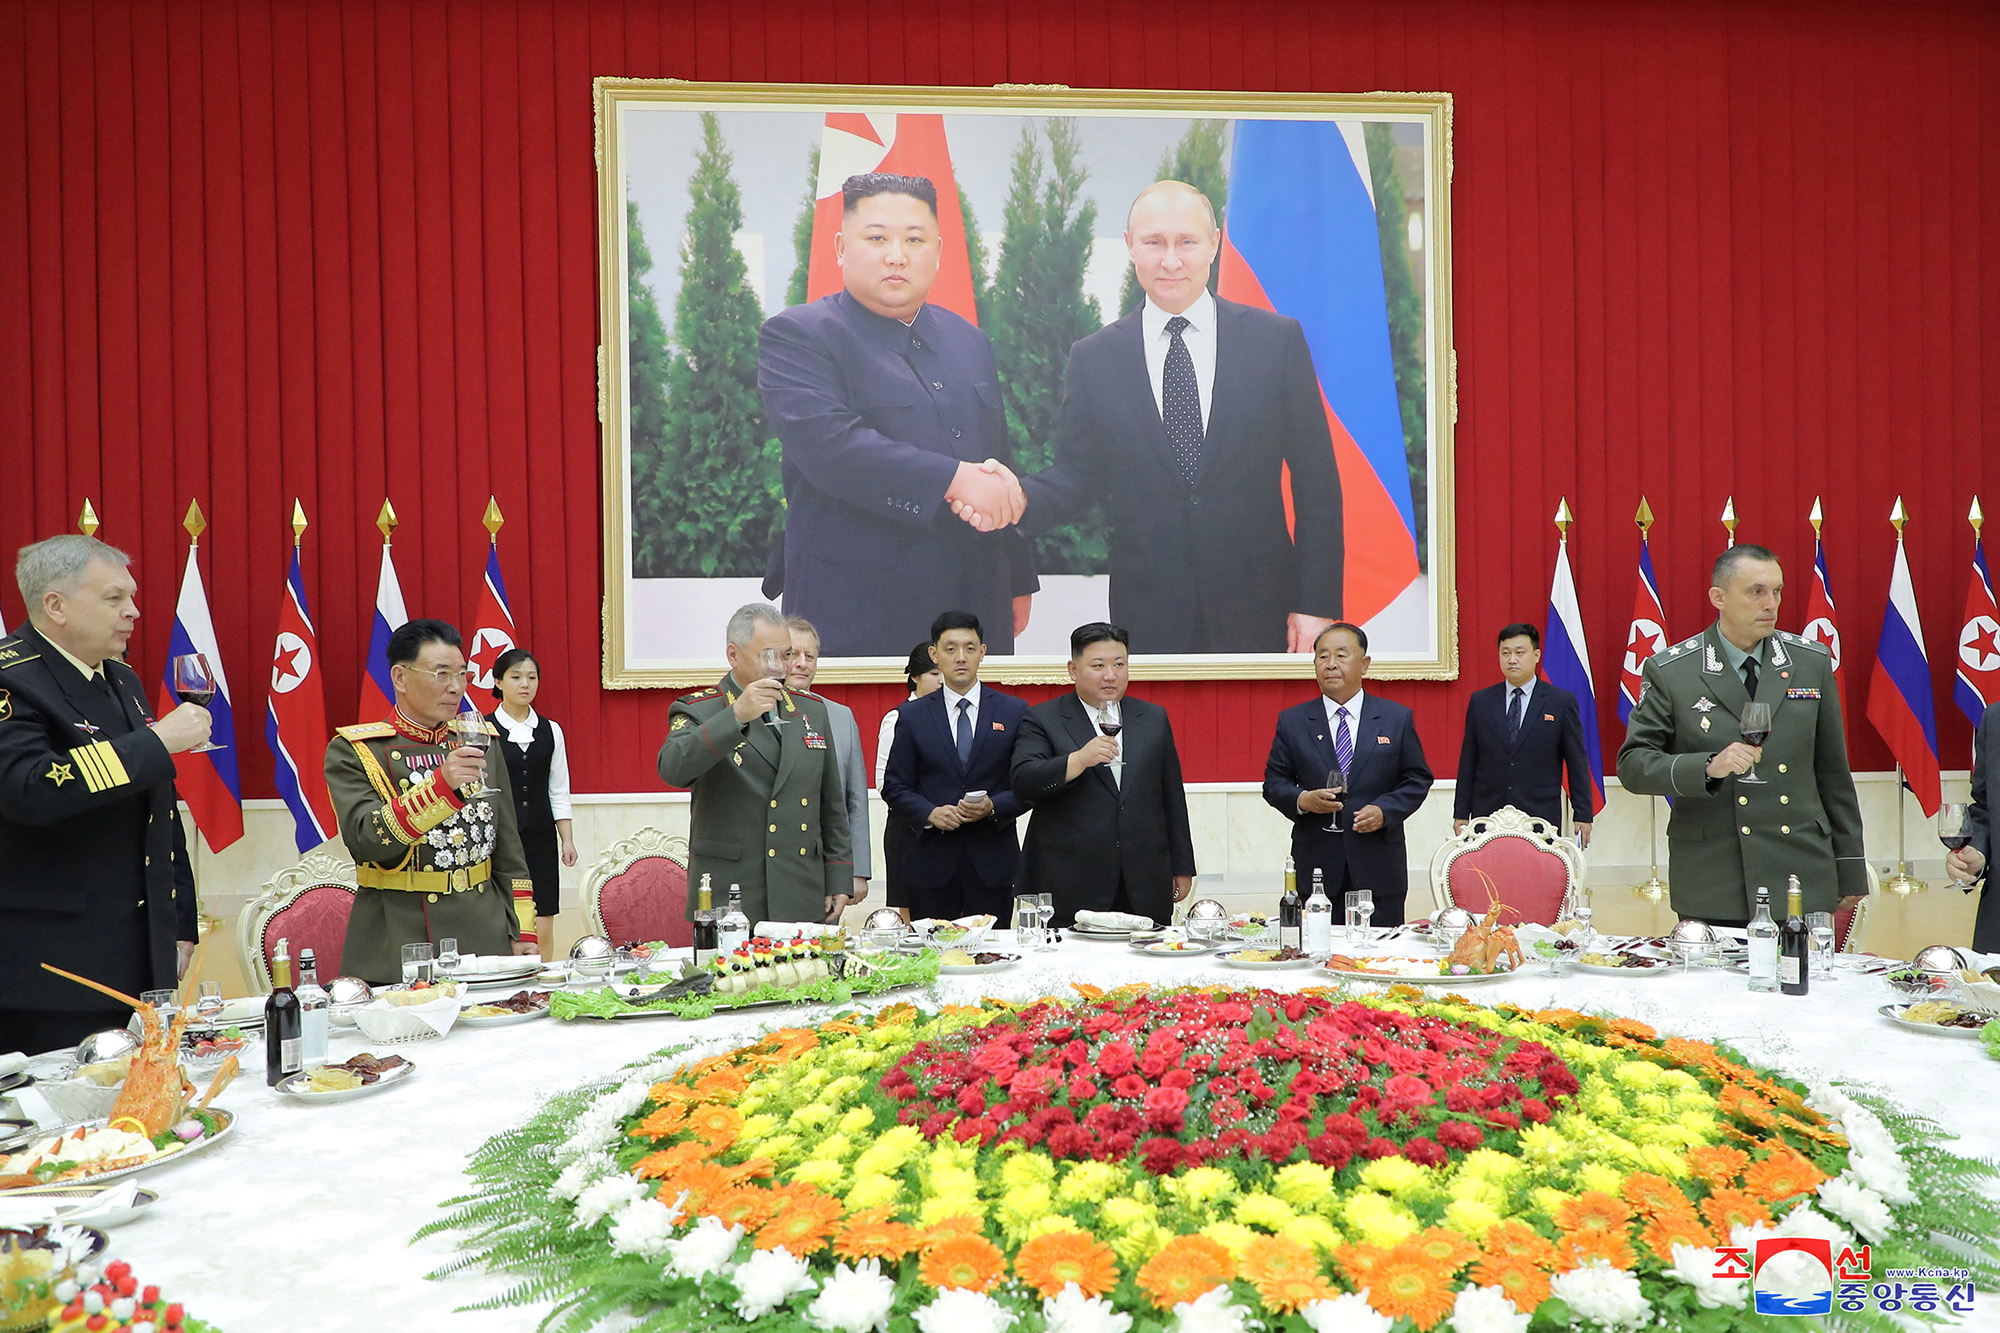 Russia's Defense Minister Sergei Shoigu attends a reception for the Russian military delegation hosted by North Korean leader Kim Jong Un as part of the 70th anniversary celebration of the Korean War armistice in Pyongyang, North Korea, on July 27, in this image released by North Korea's Korean Central News Agency. 